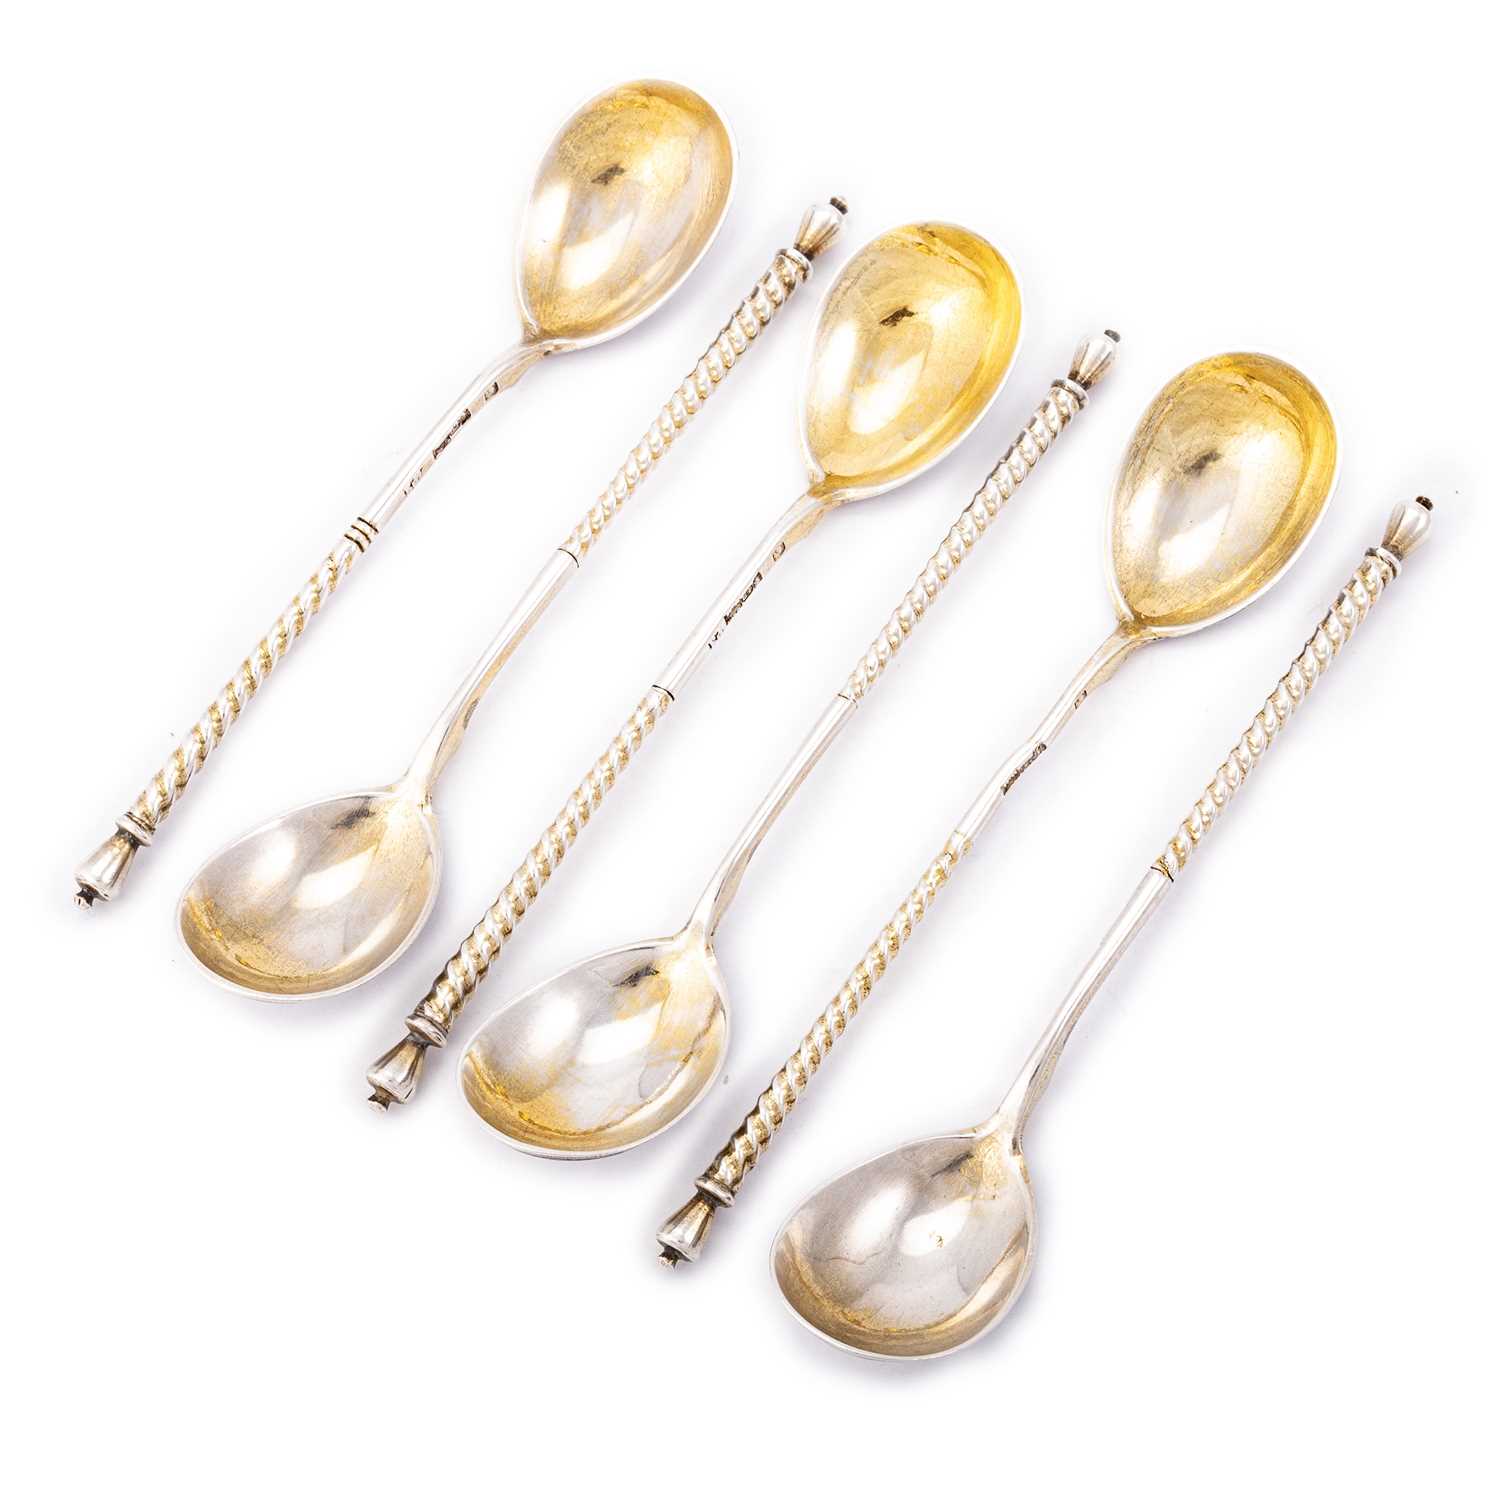 A SET OF SIX 19TH CENTURY RUSSIAN SILVER AND NIELLO SPOONS - Image 2 of 2